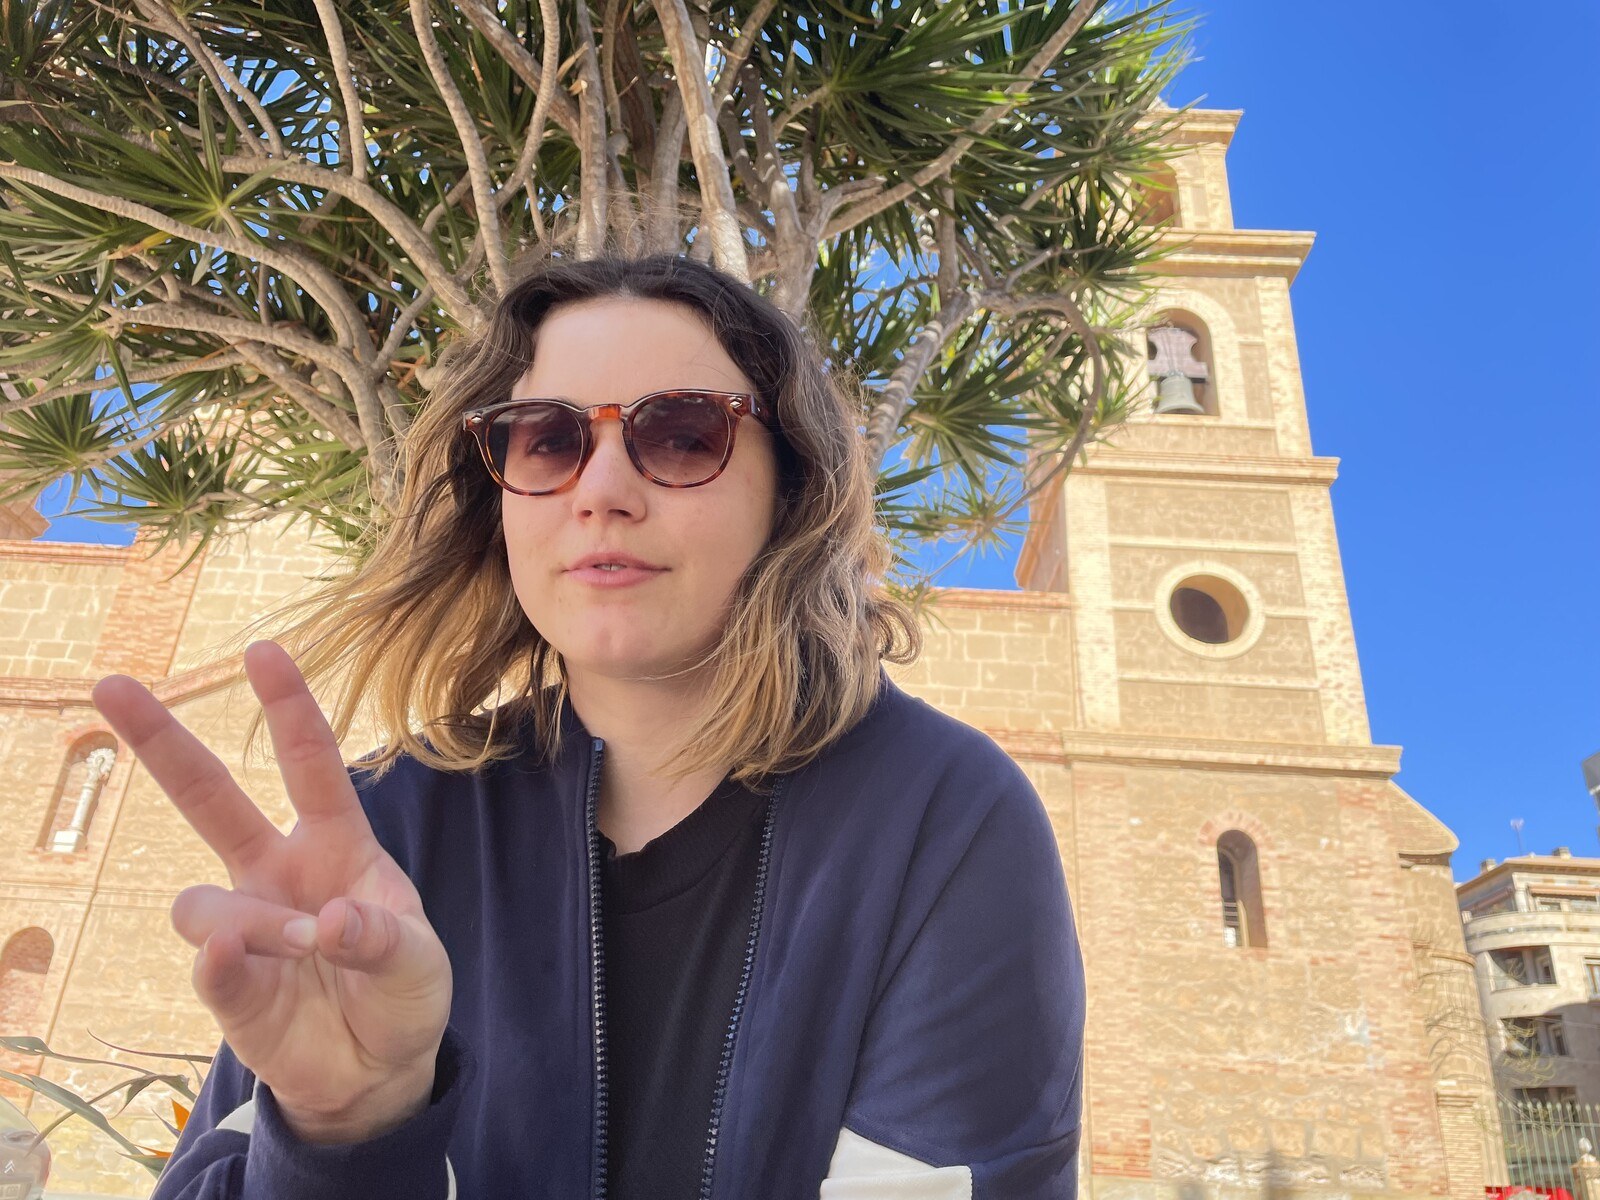 Sam flashing a peace sign in front of an old church in Torrevieja